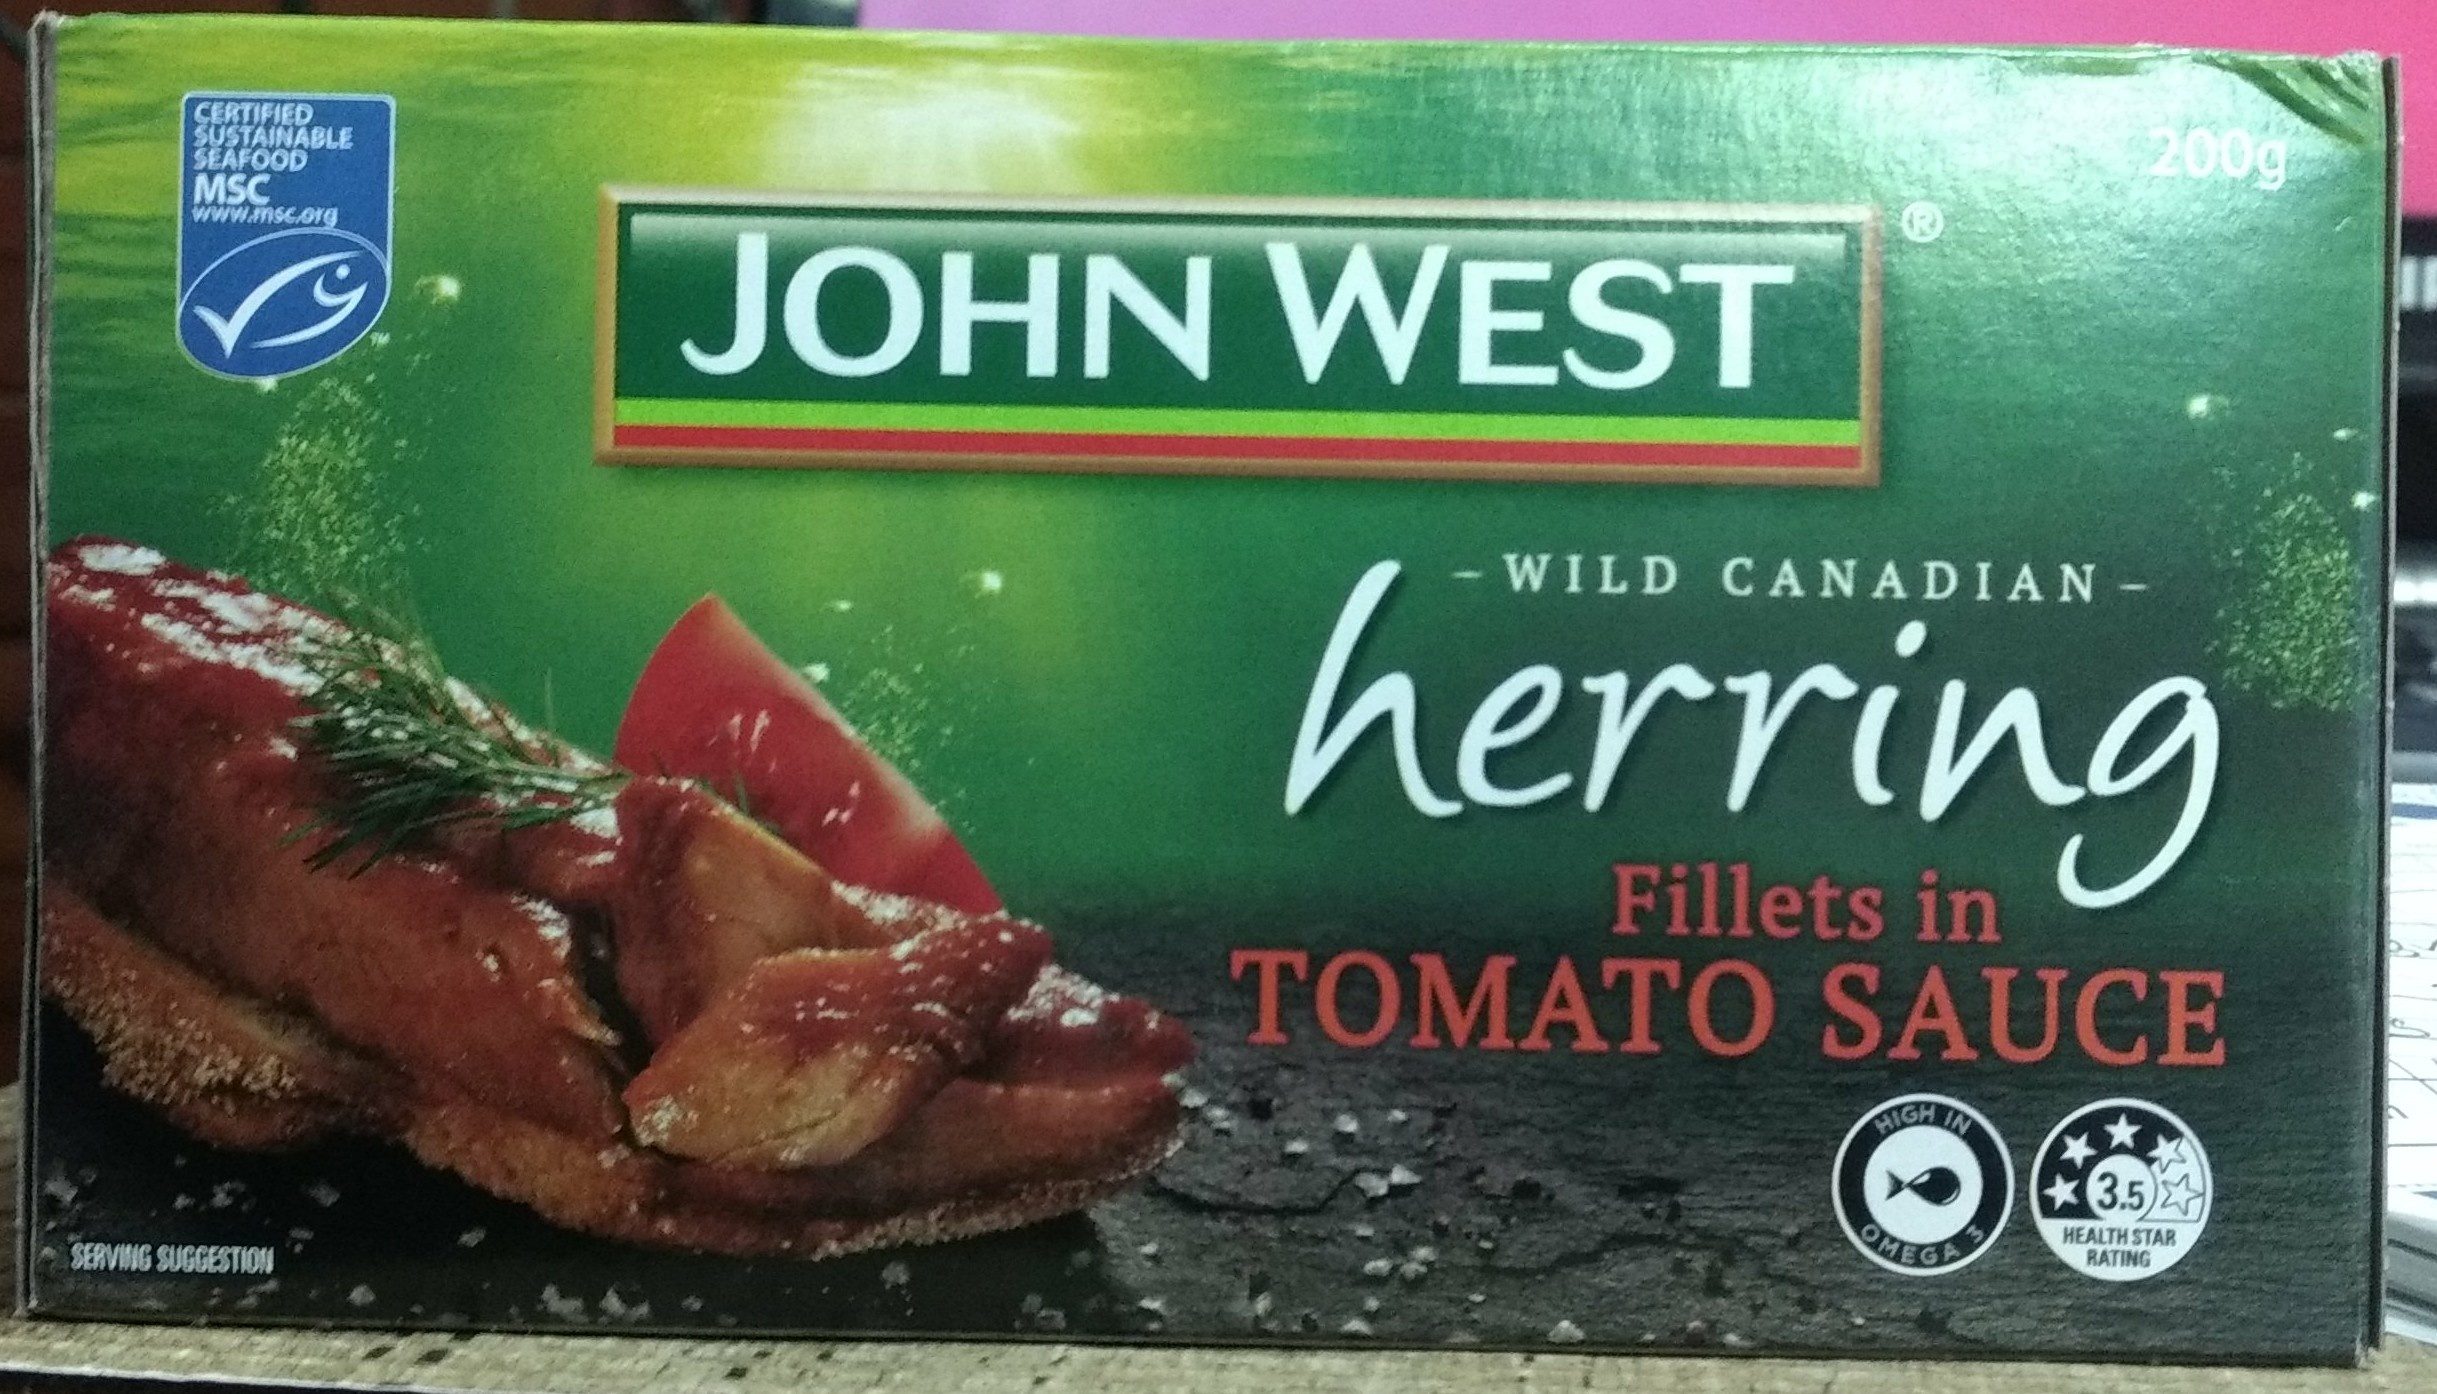 Wild Canadian herring fillets in tomato sauce - Product